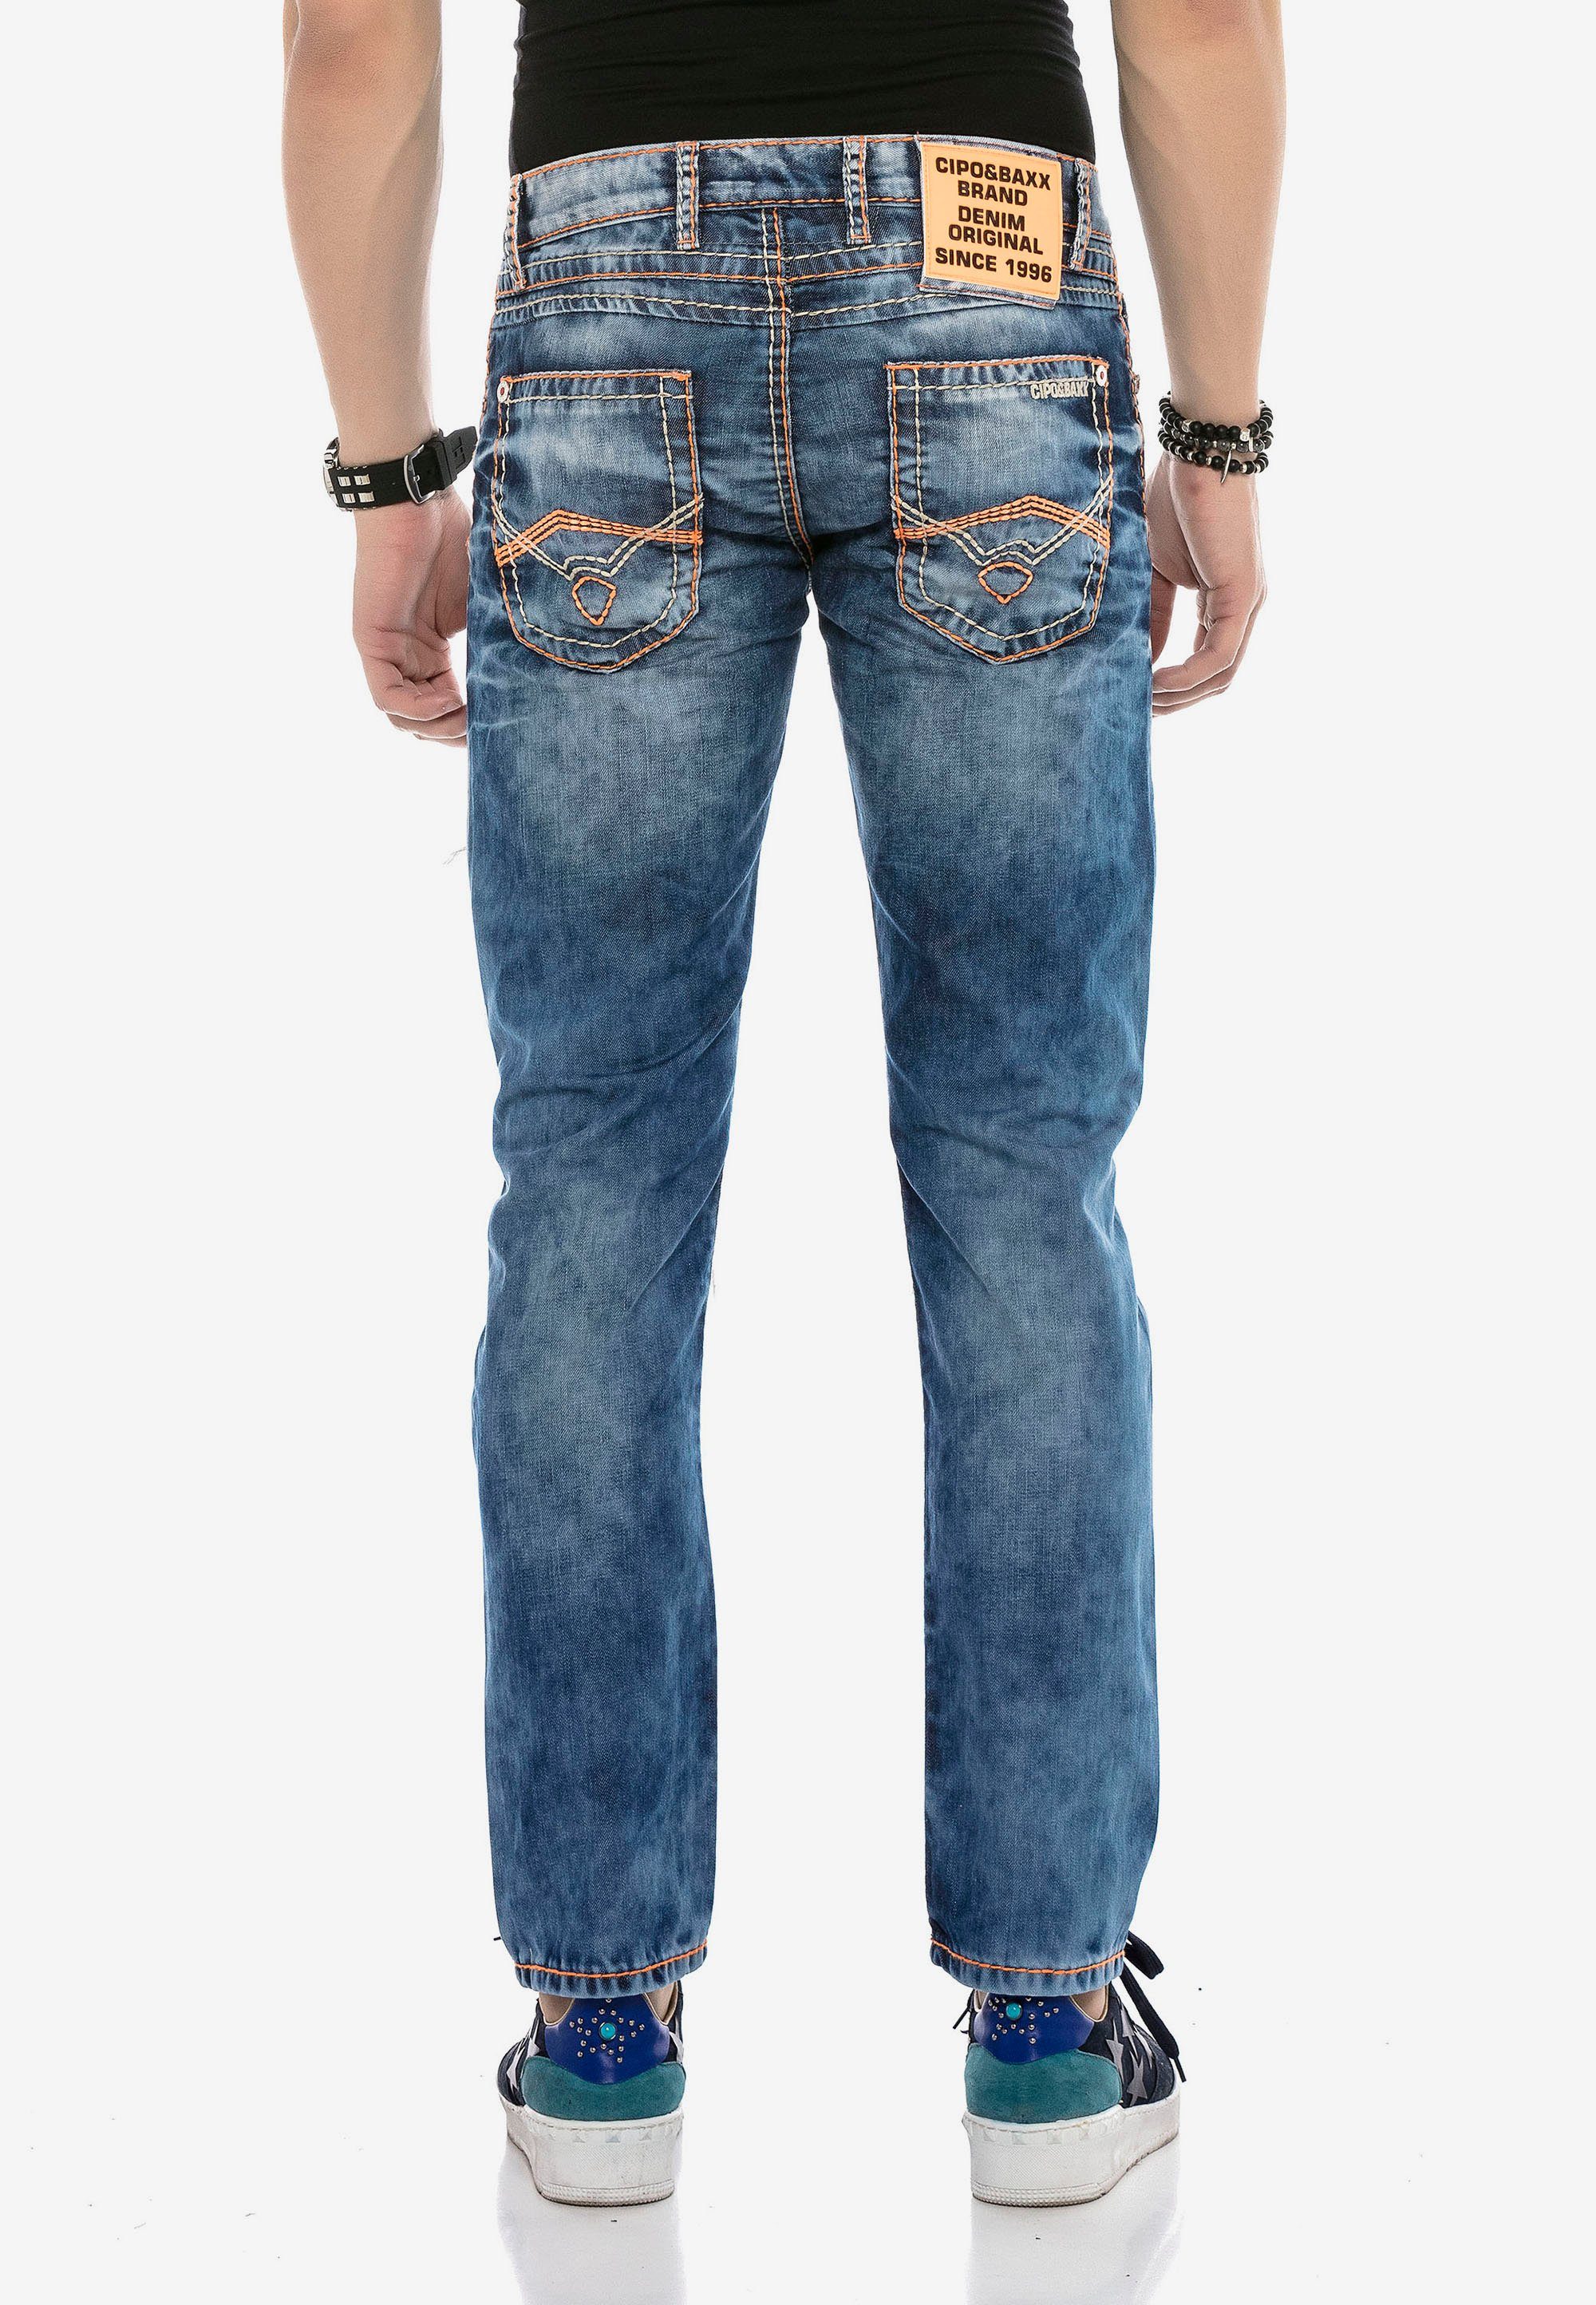 Destroyed-Look im & Bequeme Baxx Jeans Cipo